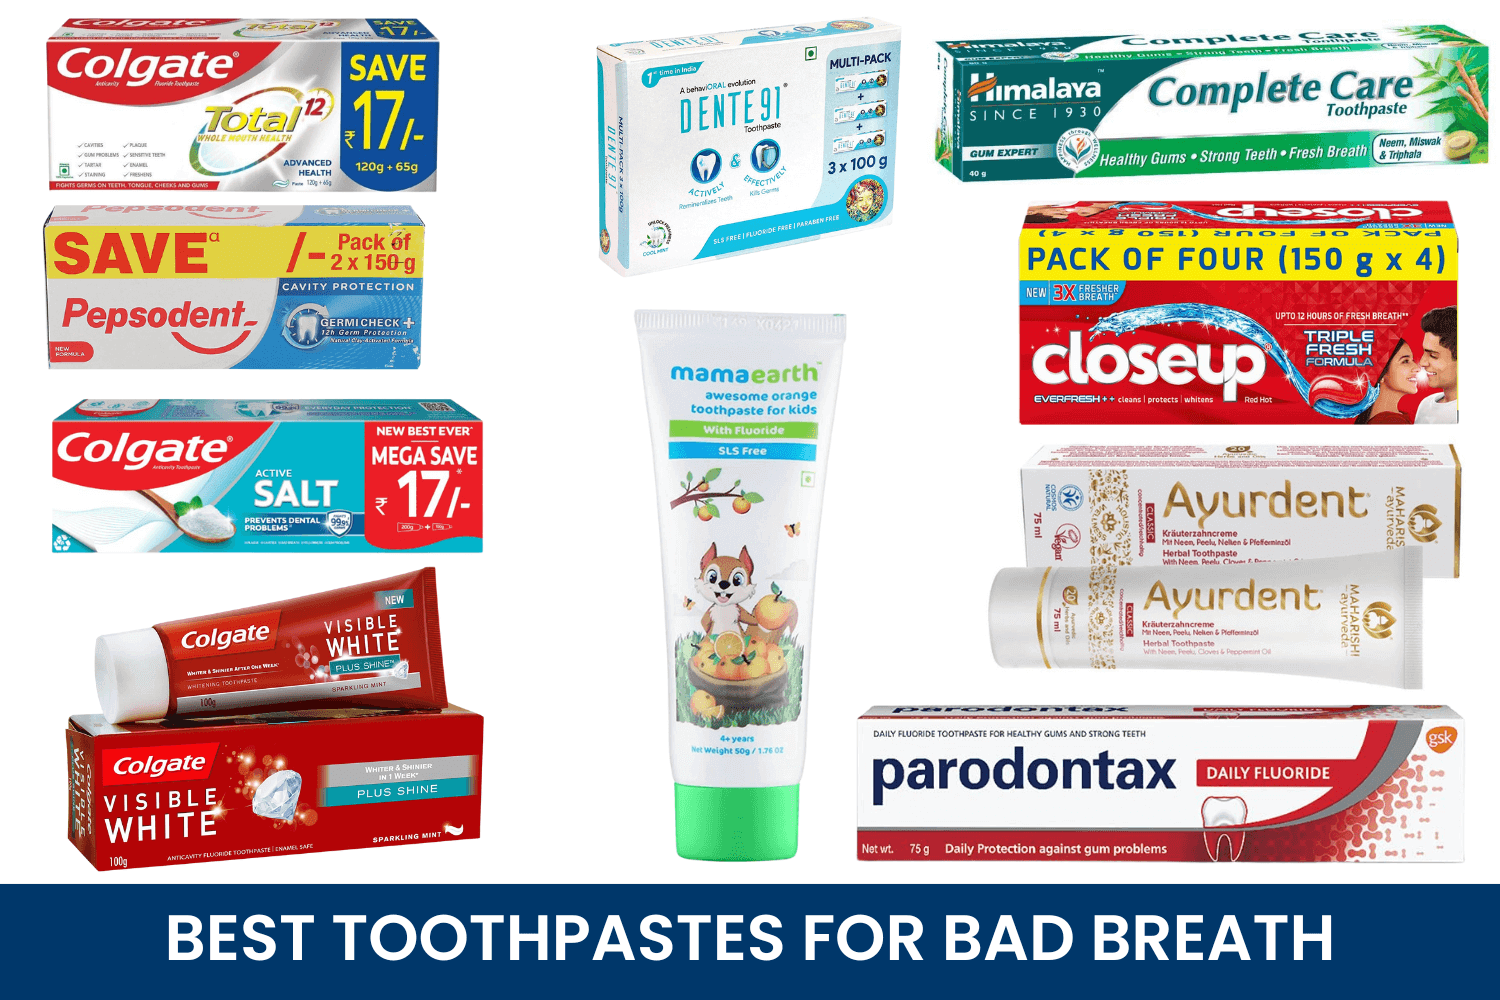 BEST TOOTHPASTES FOR BAD BREATH